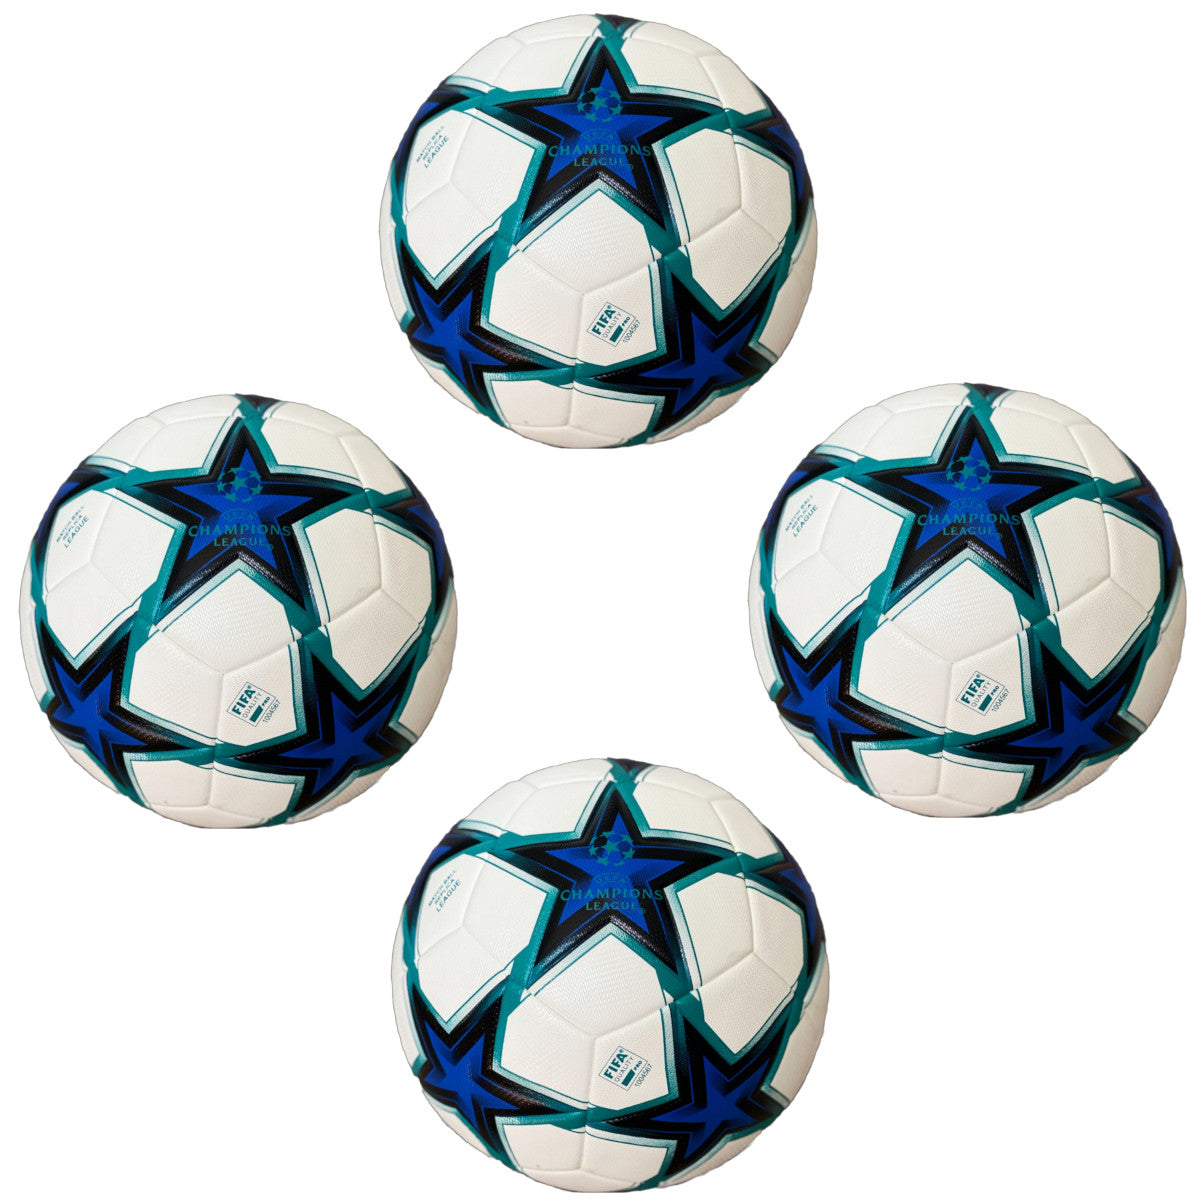 Soccer Ball Size 5 Pack of 10 Champions League for Training White Blue Black